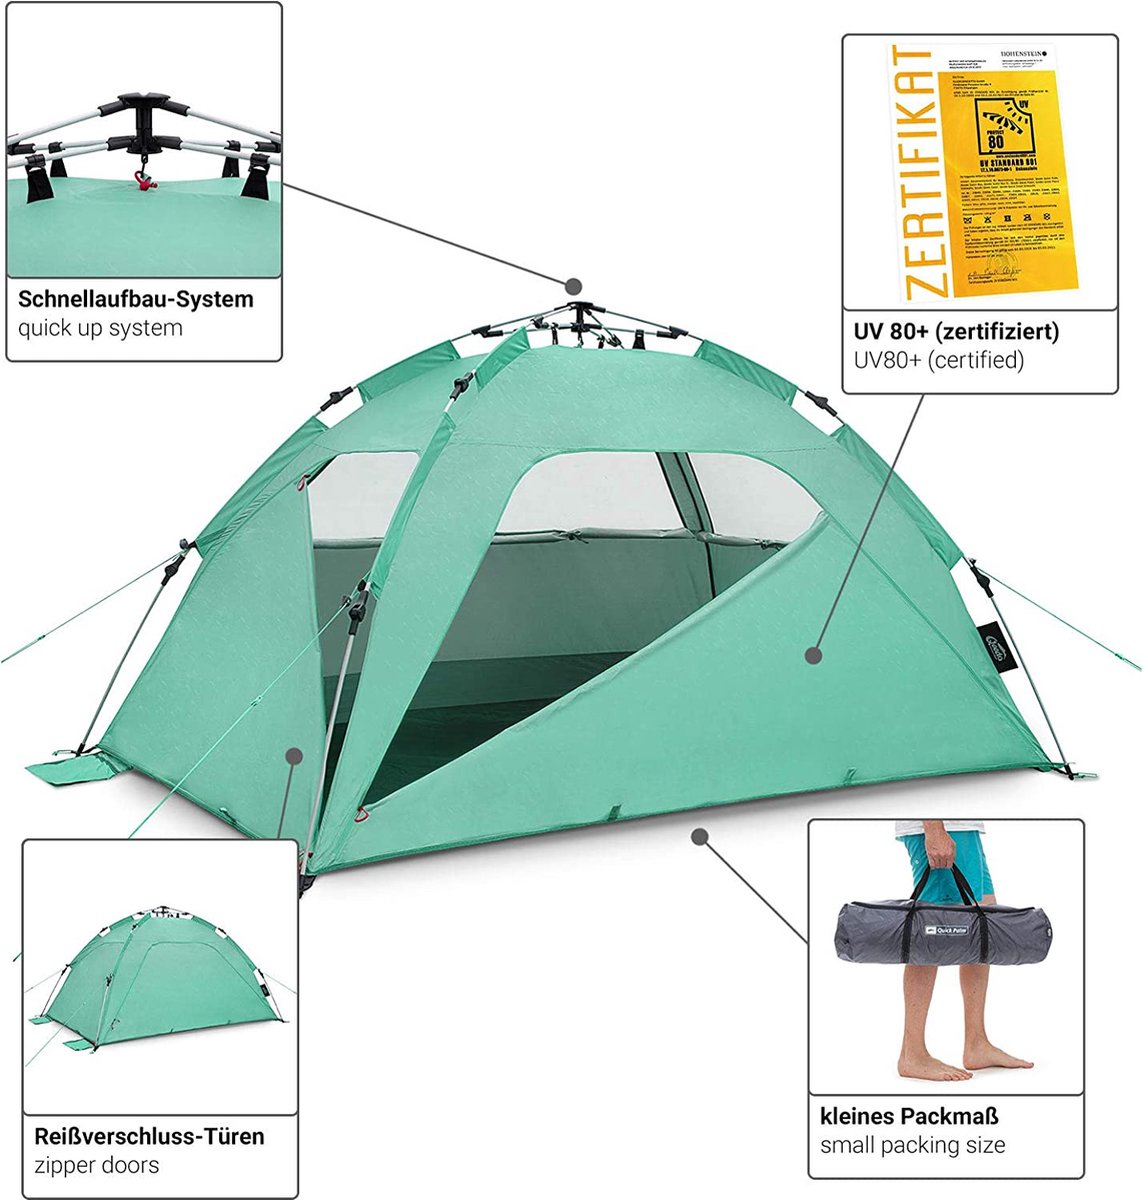 CGPN - Quick Palm Beach Tent UV Protection (UV80 according to UV Standard 801), quickly set up (Quick-Up System)